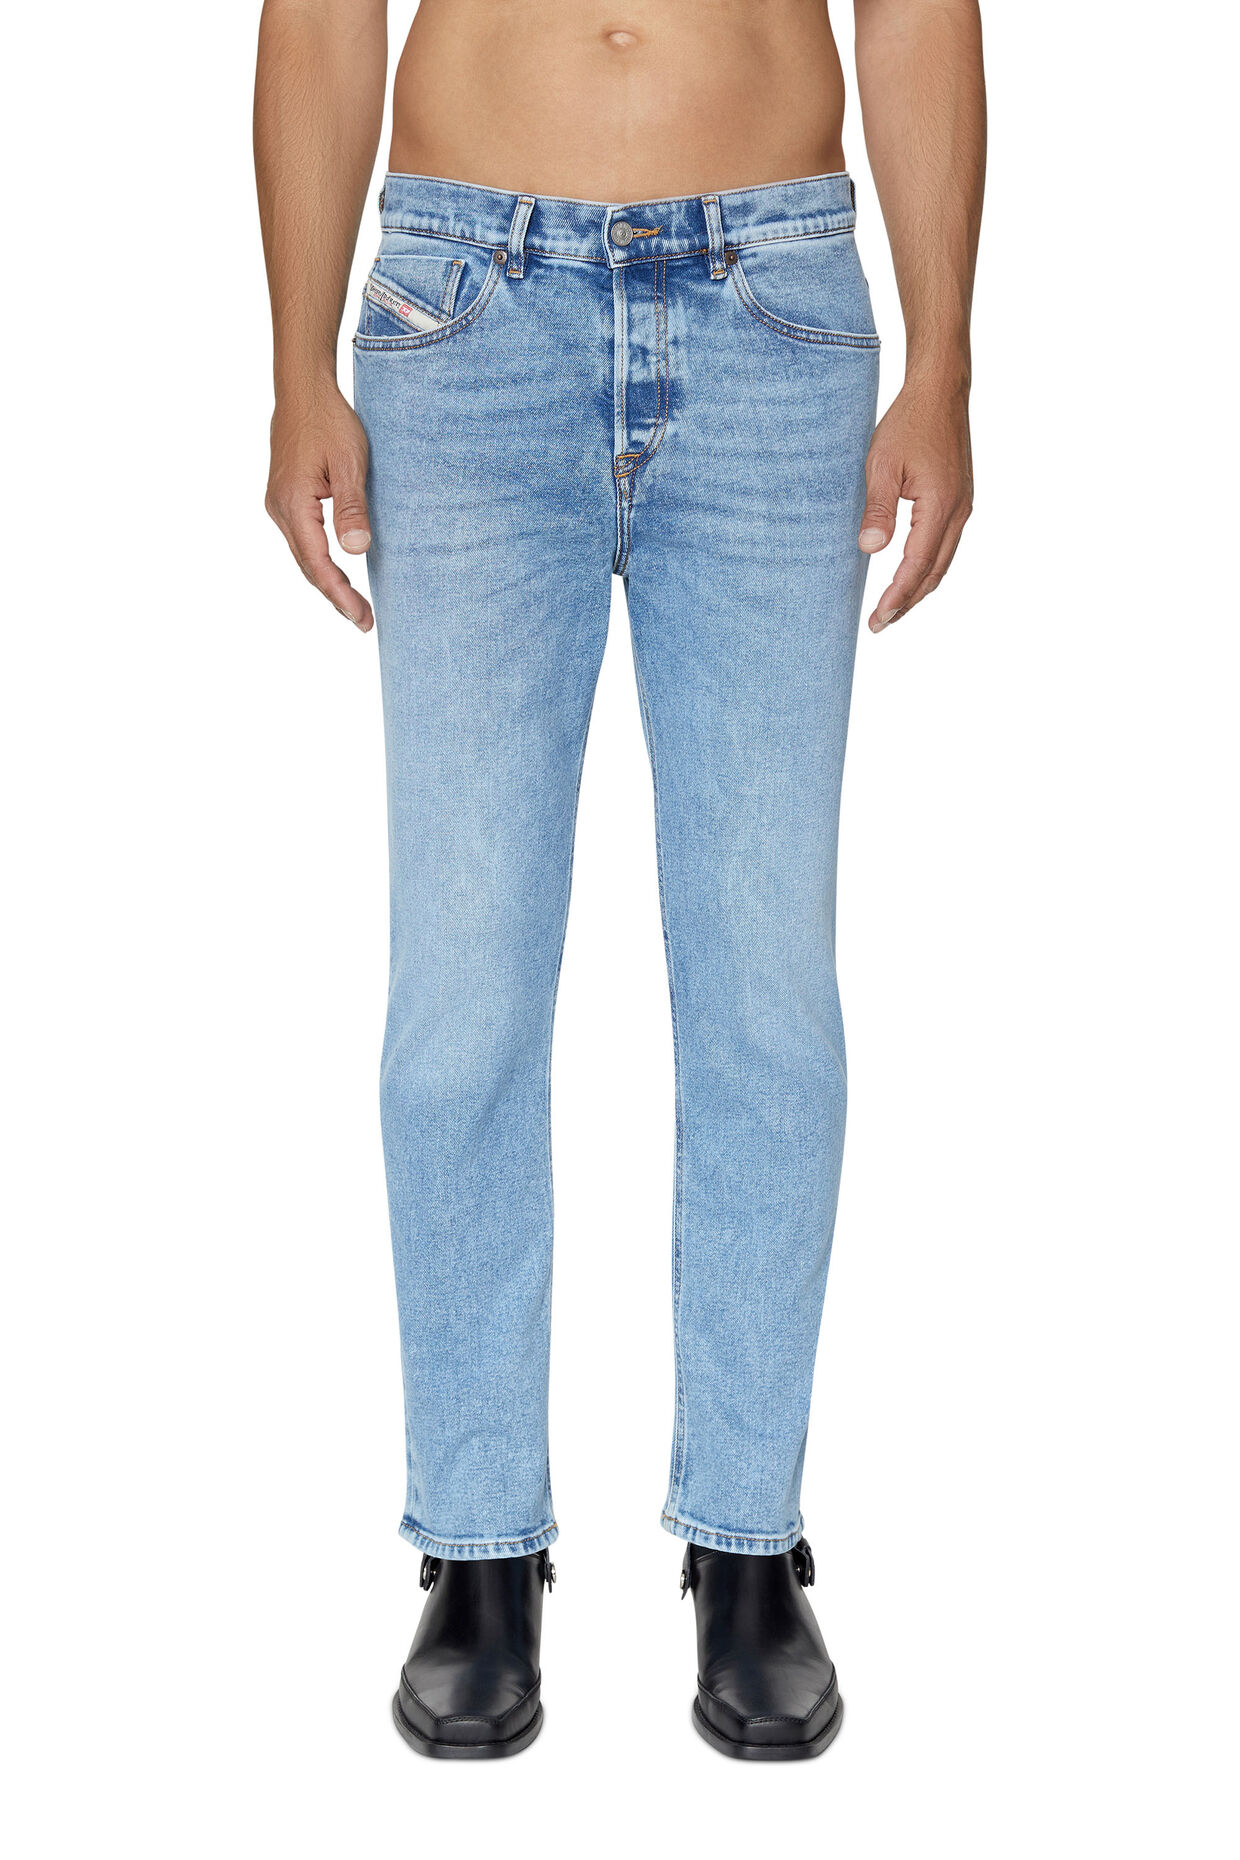 diesel.com | 2005 D-FINING 09B92 Tapered Jeans